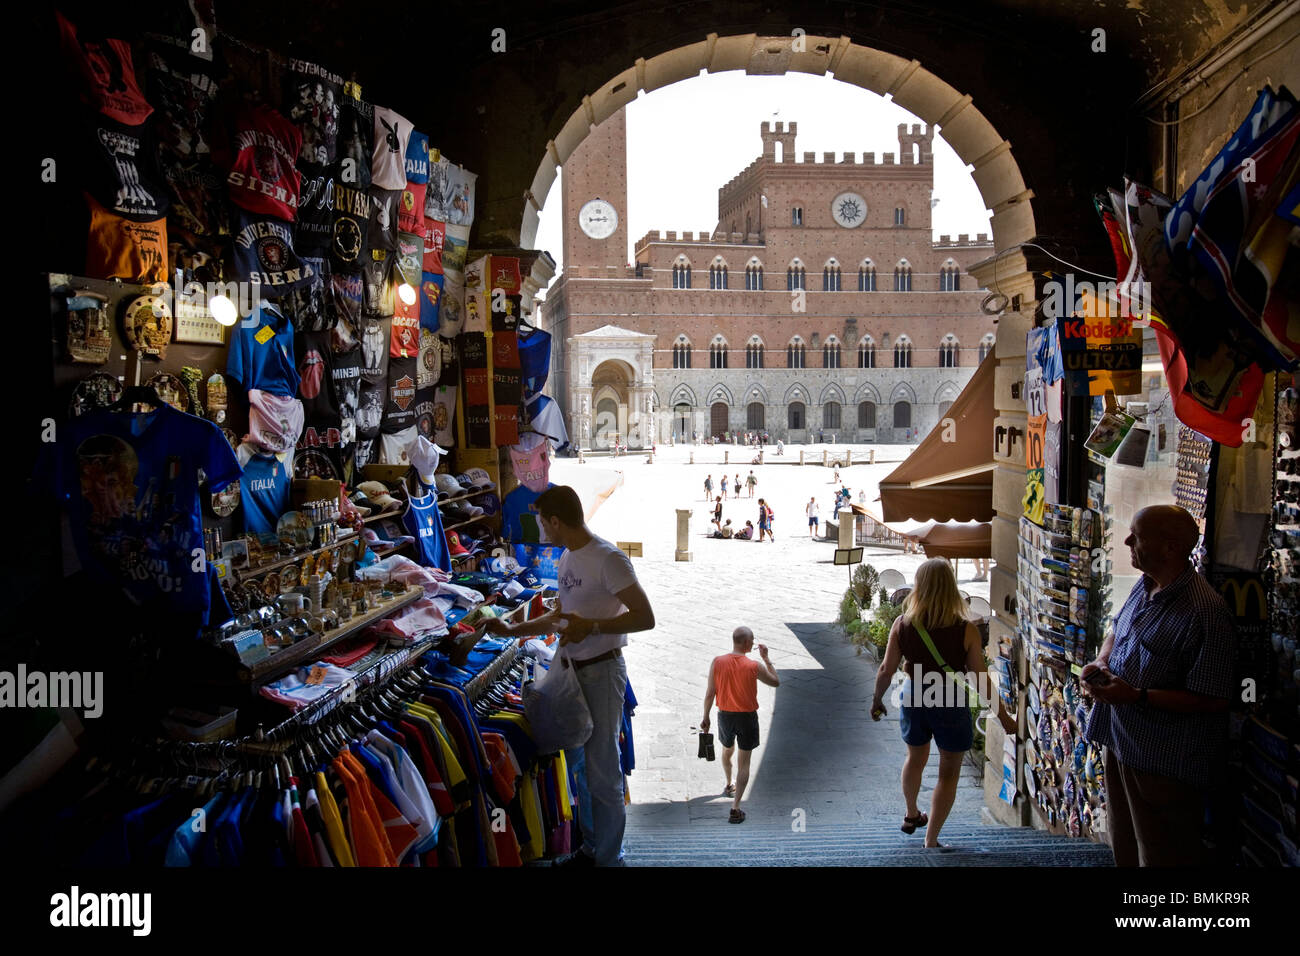 Merchandising sellers in the access arch in the Piazza del Campo Il Palio square, Sienna, Italy Stock Photo